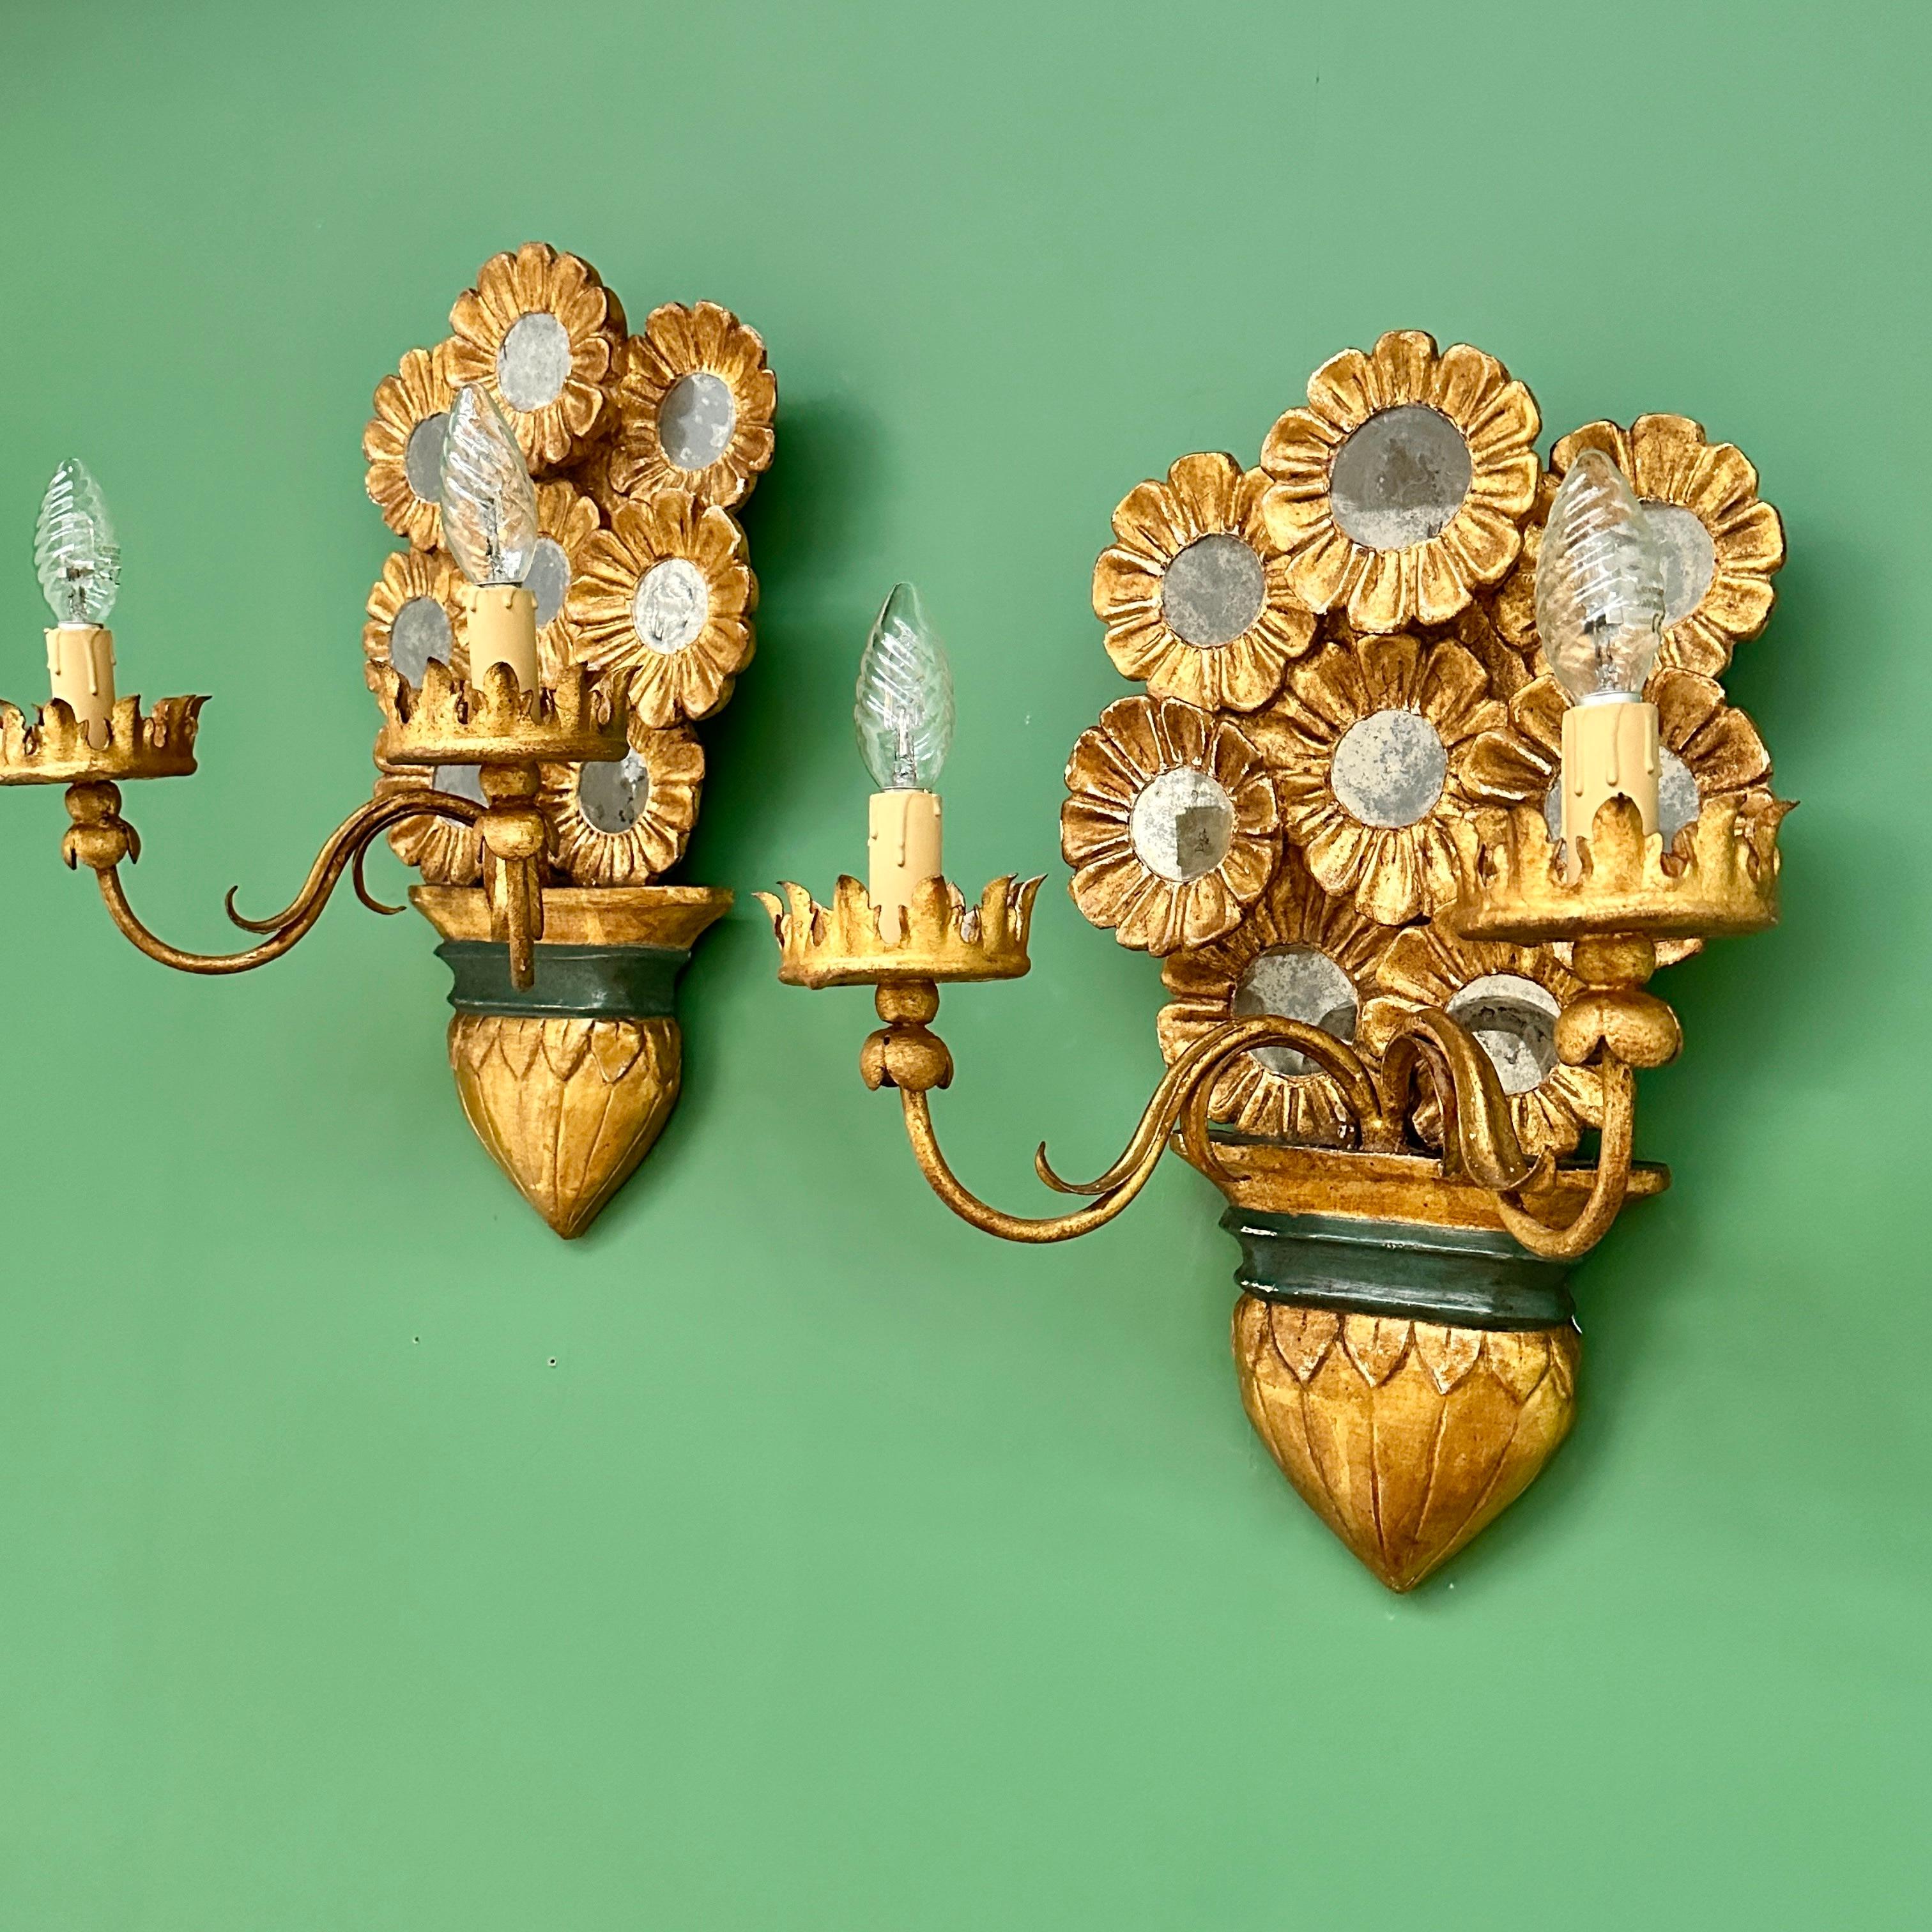 Hand-Carved Pair Of Early C20th Italian Giltwood Wall Lights (1 of 2 pairs available) For Sale